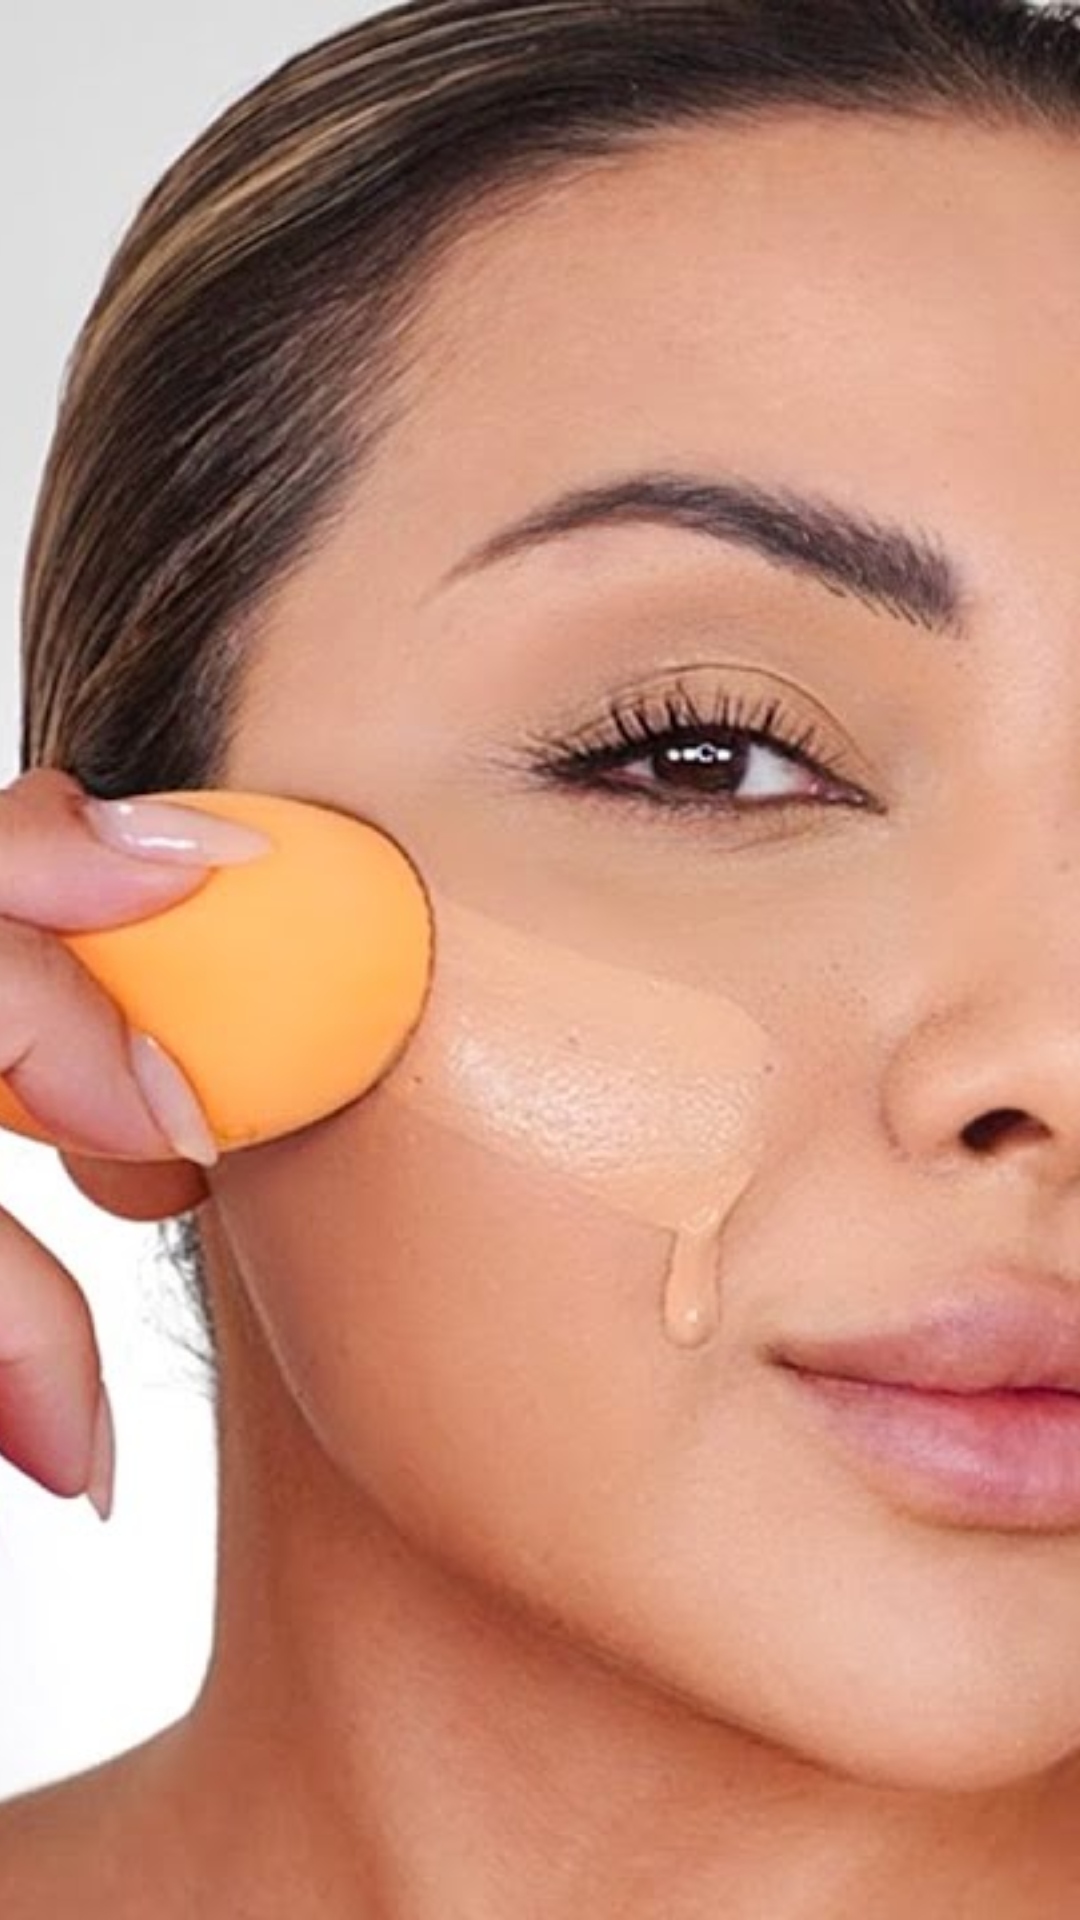 5 side effects of regular foundation use